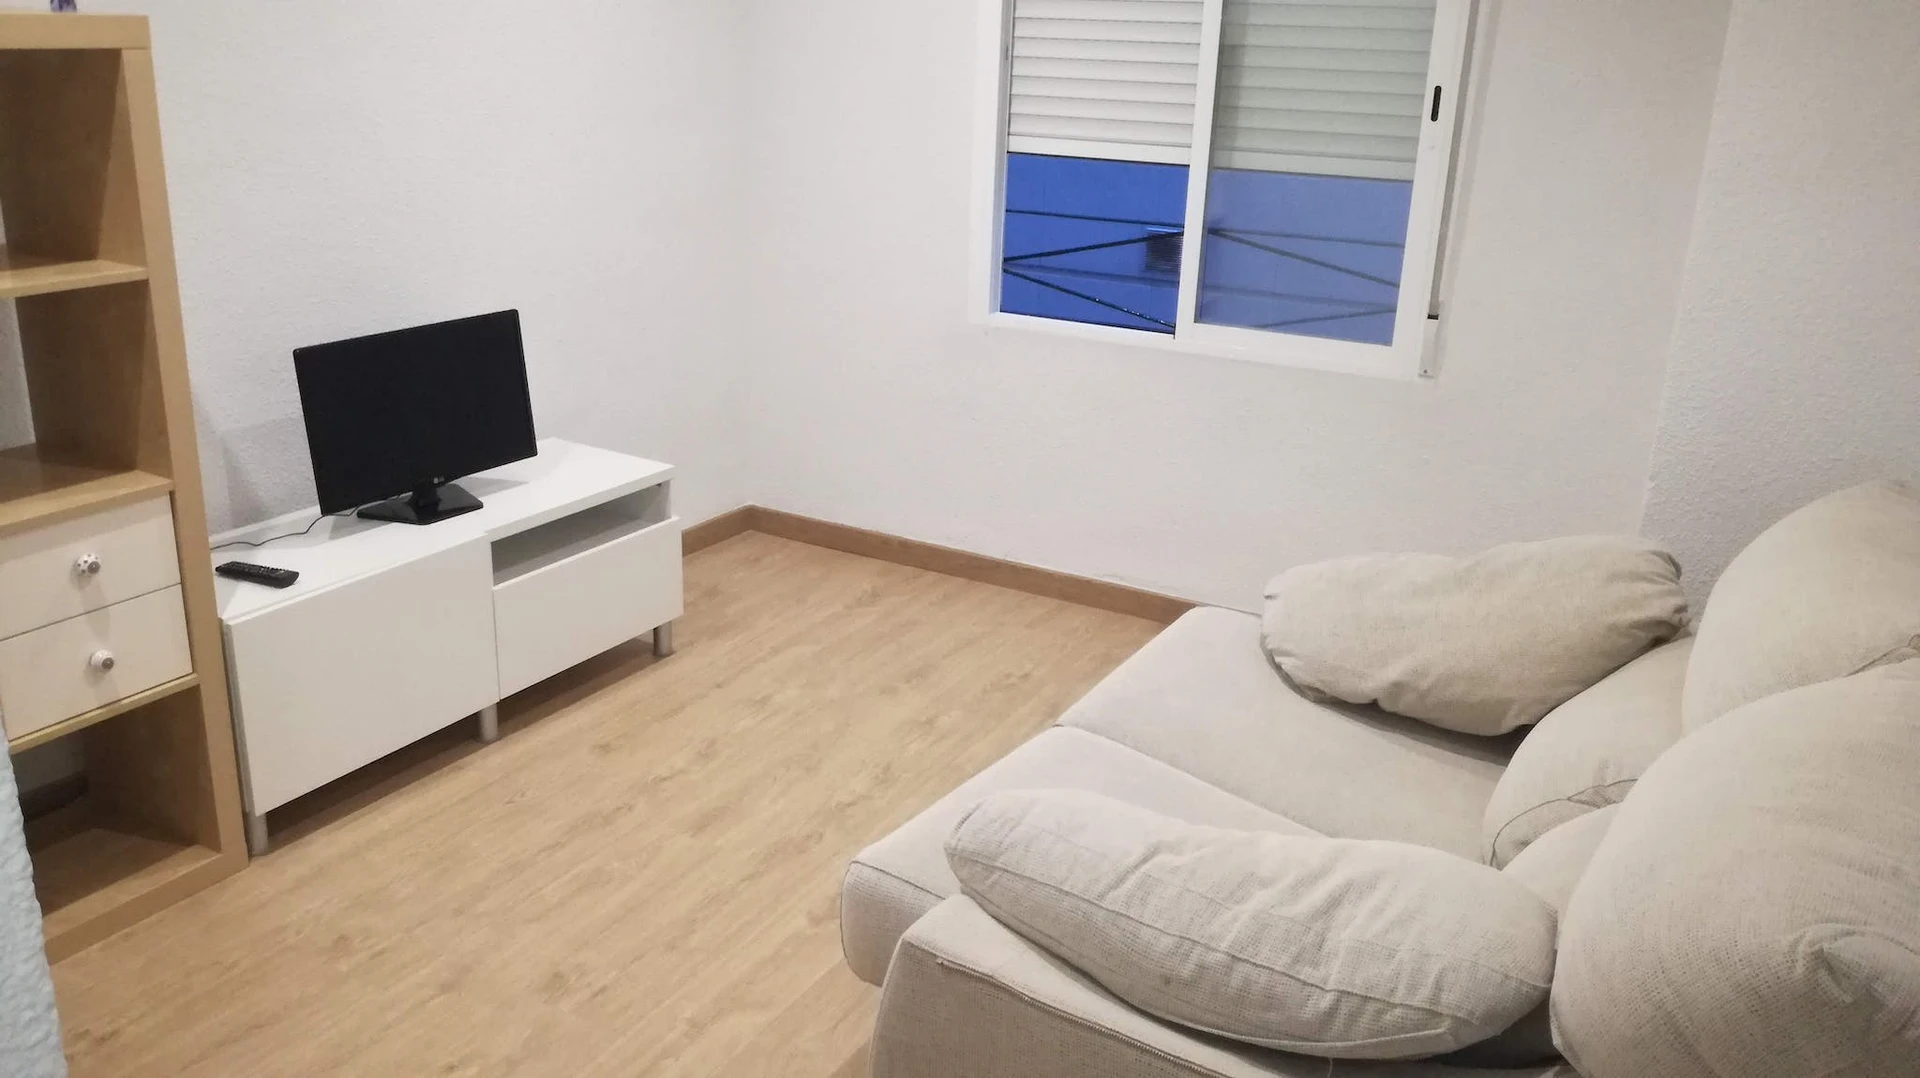 Accommodation in the centre of Elche